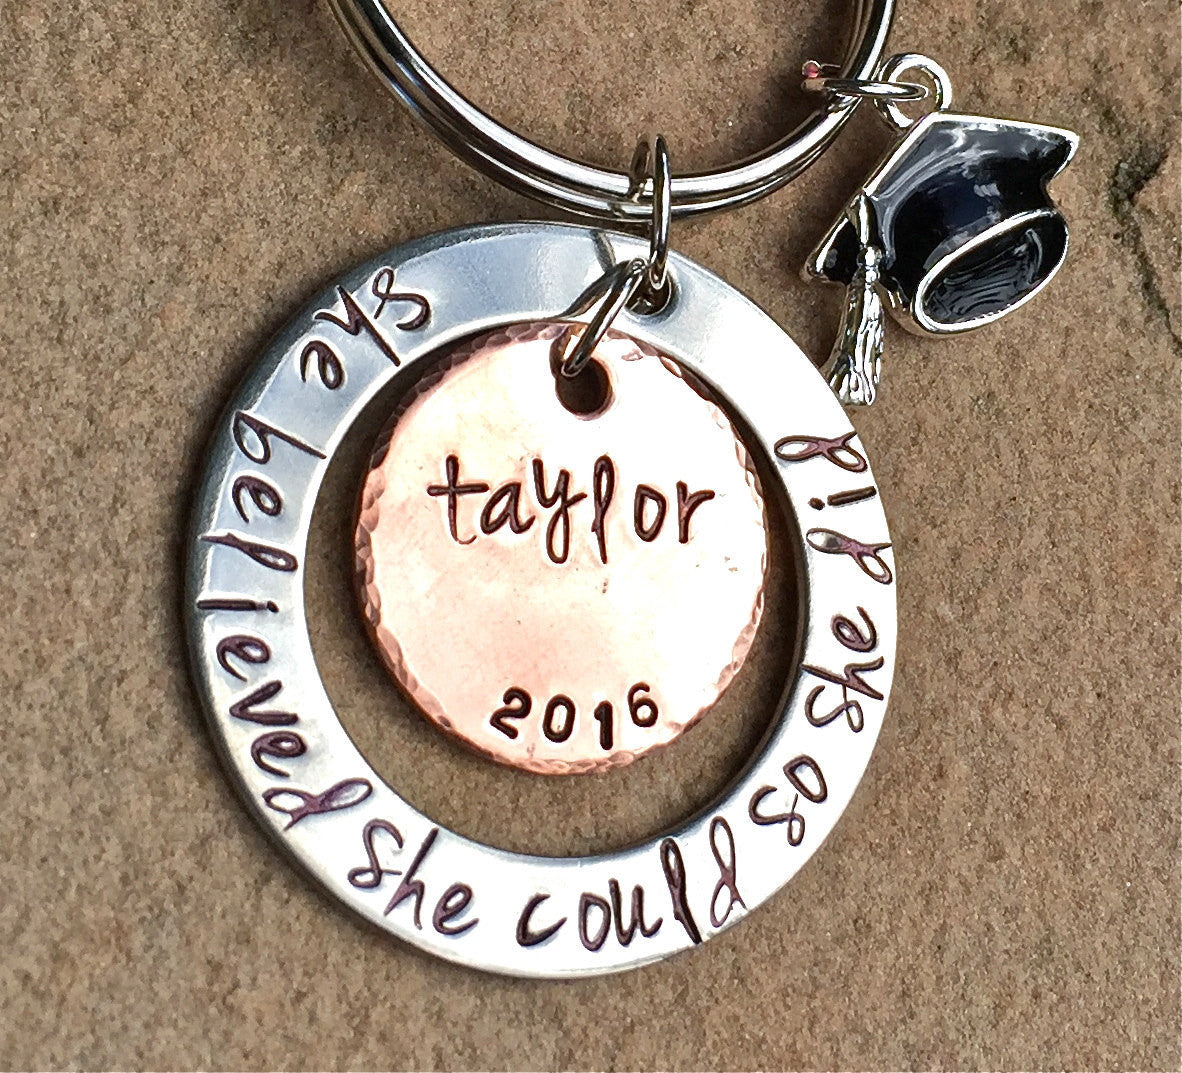 She Believed She Could So She Did, Graduation Gifts 2016 - Natashaaloha, jewelry, bracelets, necklace, keychains, fishing lures, gifts for men, charms, personalized, 